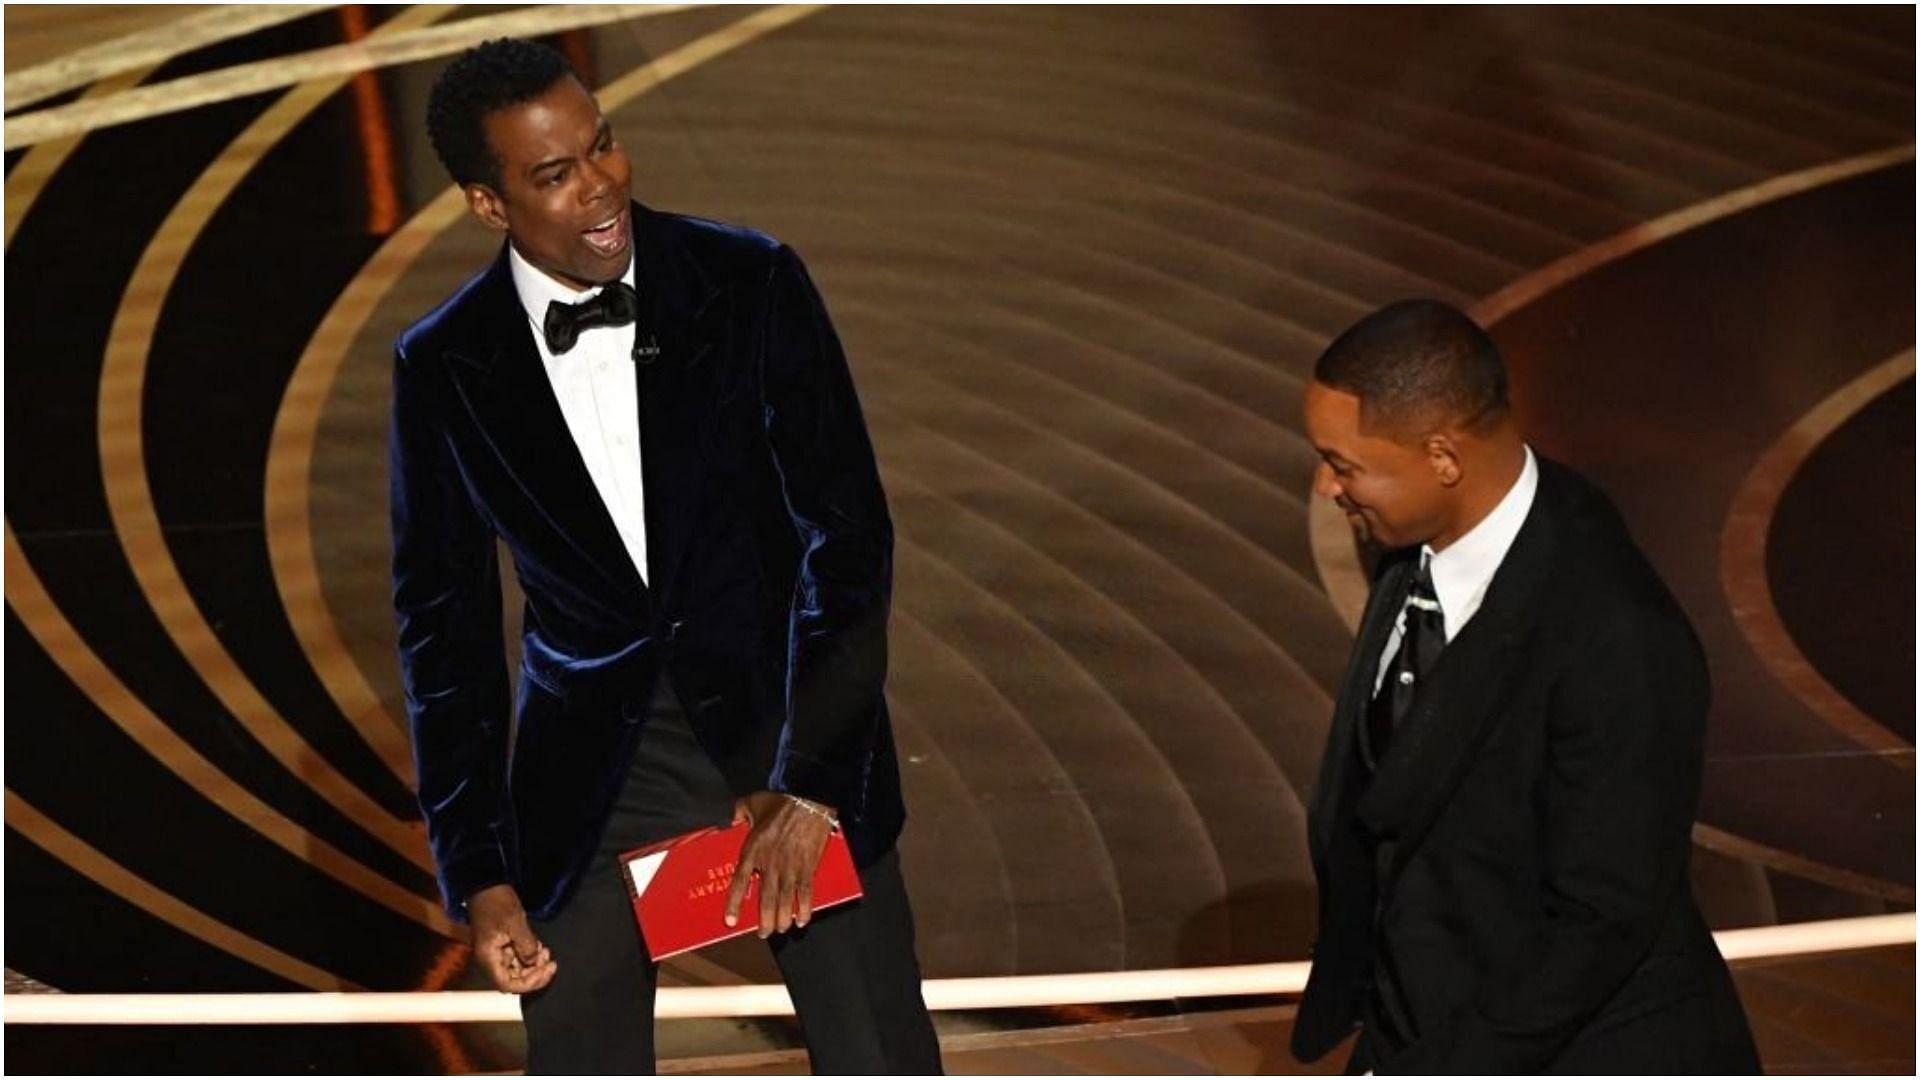 Will Smith approaches Chris Rock on stage during the 94th Oscars (Image via Robyn Beck/Getty Images)